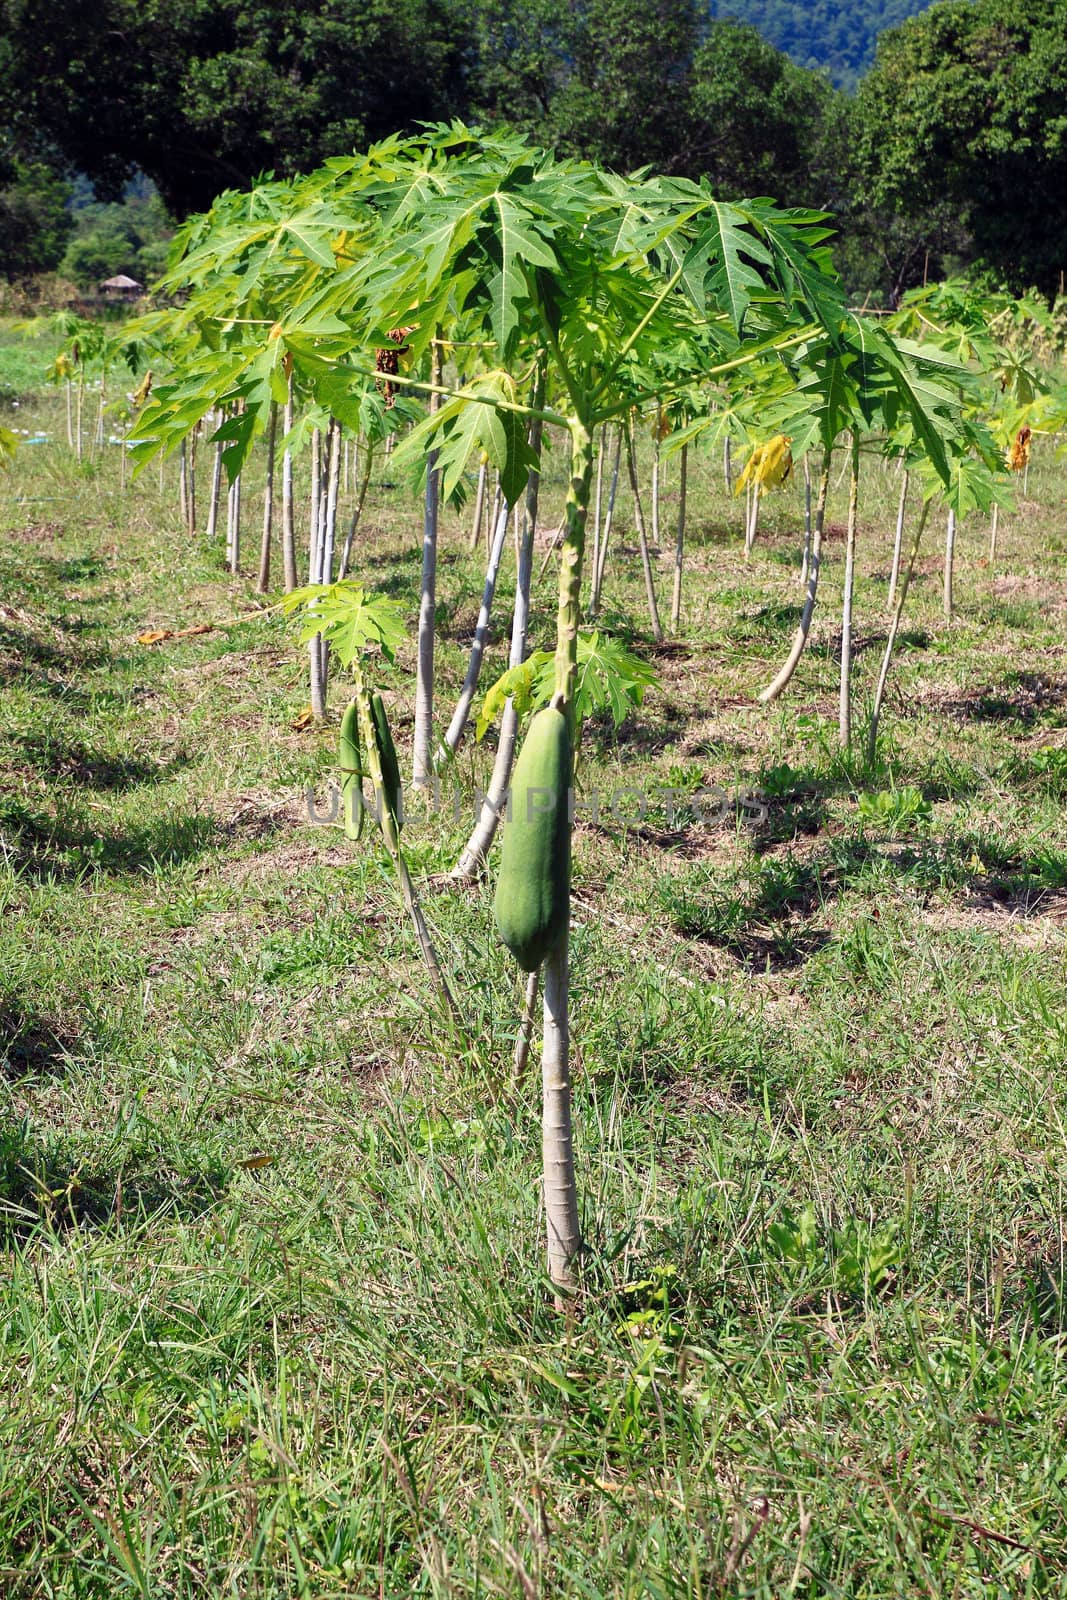 Papayas in the small tree, in Thailand